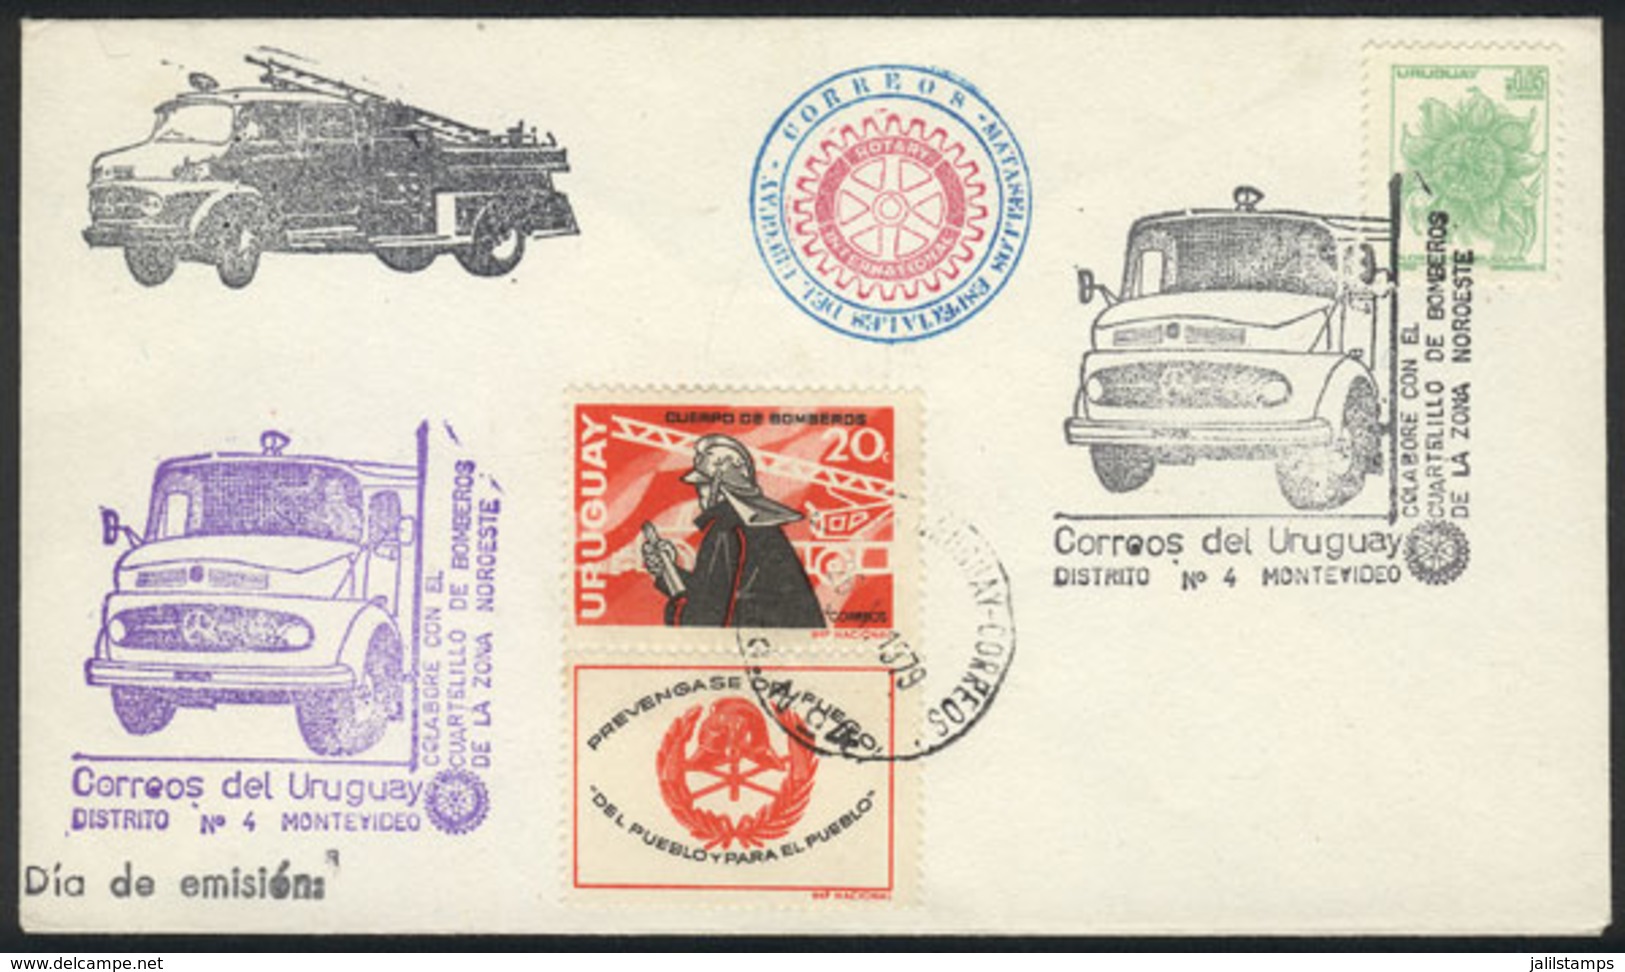 URUGUAY: Cover Used On 6/OC/1979 With Special Postmarks Topic Rotary And FIREMEN, VF Quality! - Uruguay